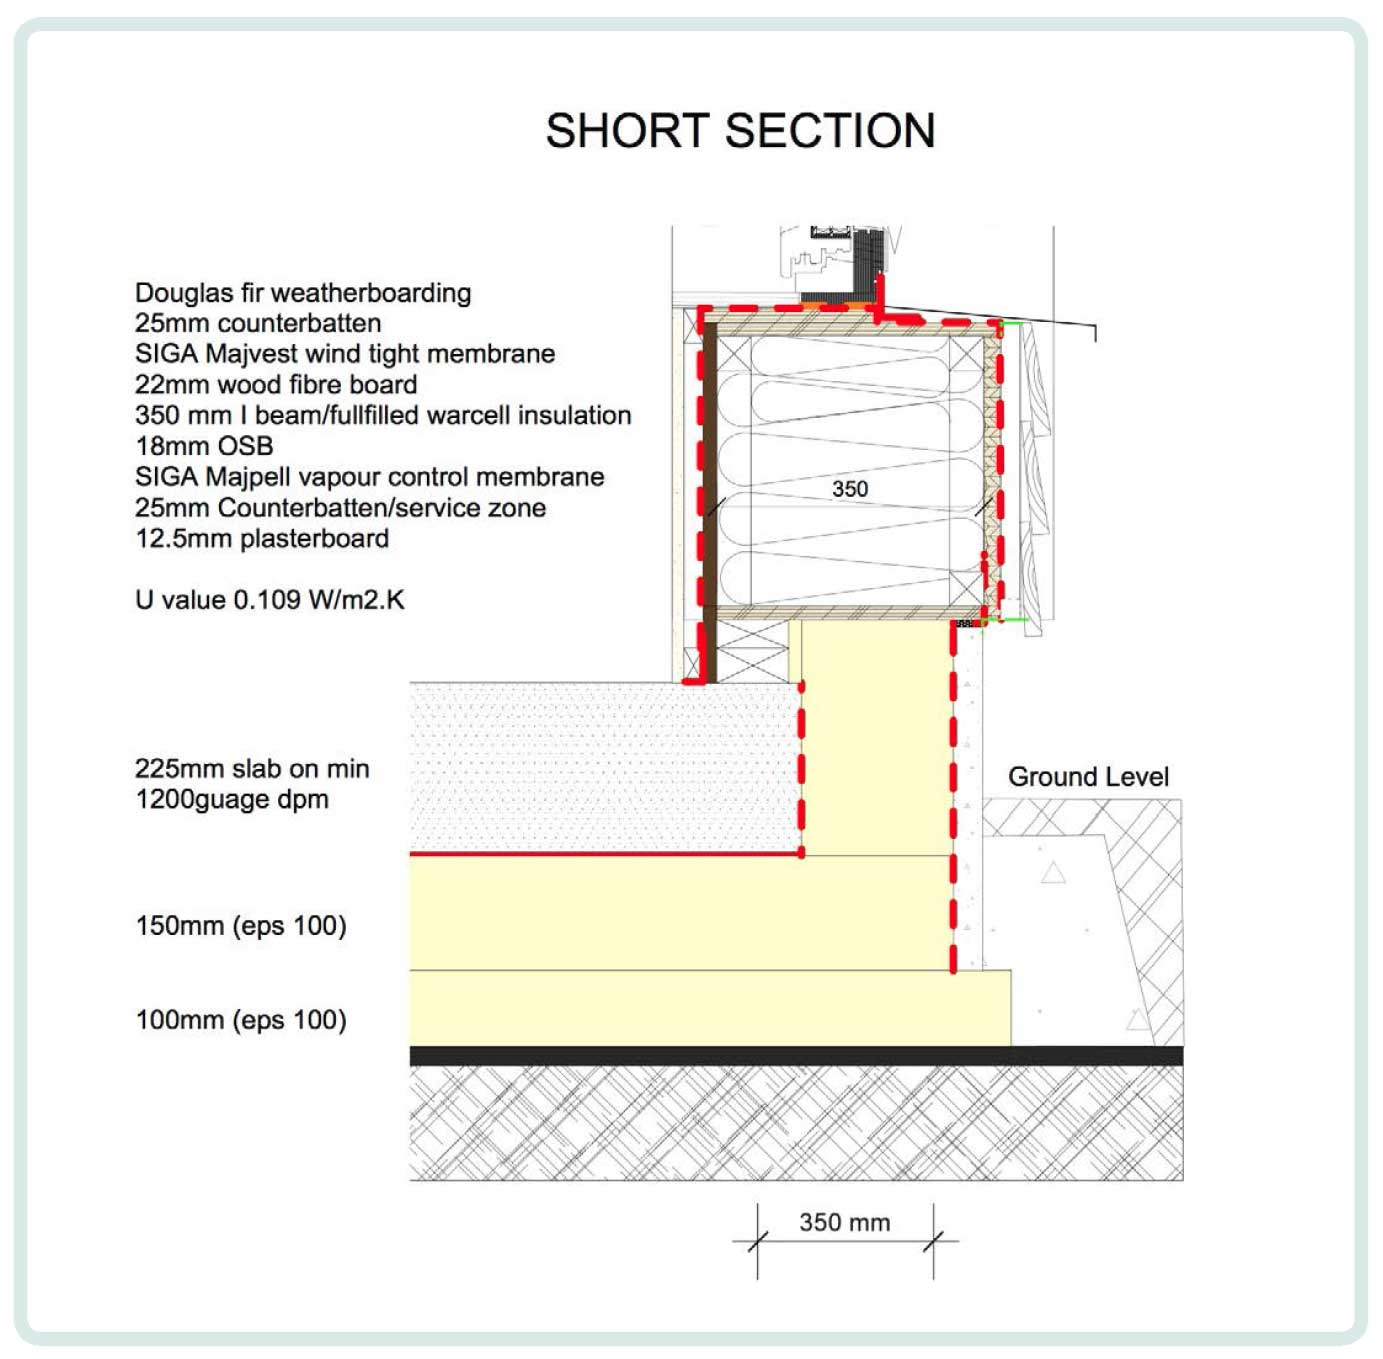 (above) Another easy-to-understand drawing, this time of a wall-to-floor junction, with the airtight and wind-tight layers marked clearly in red.